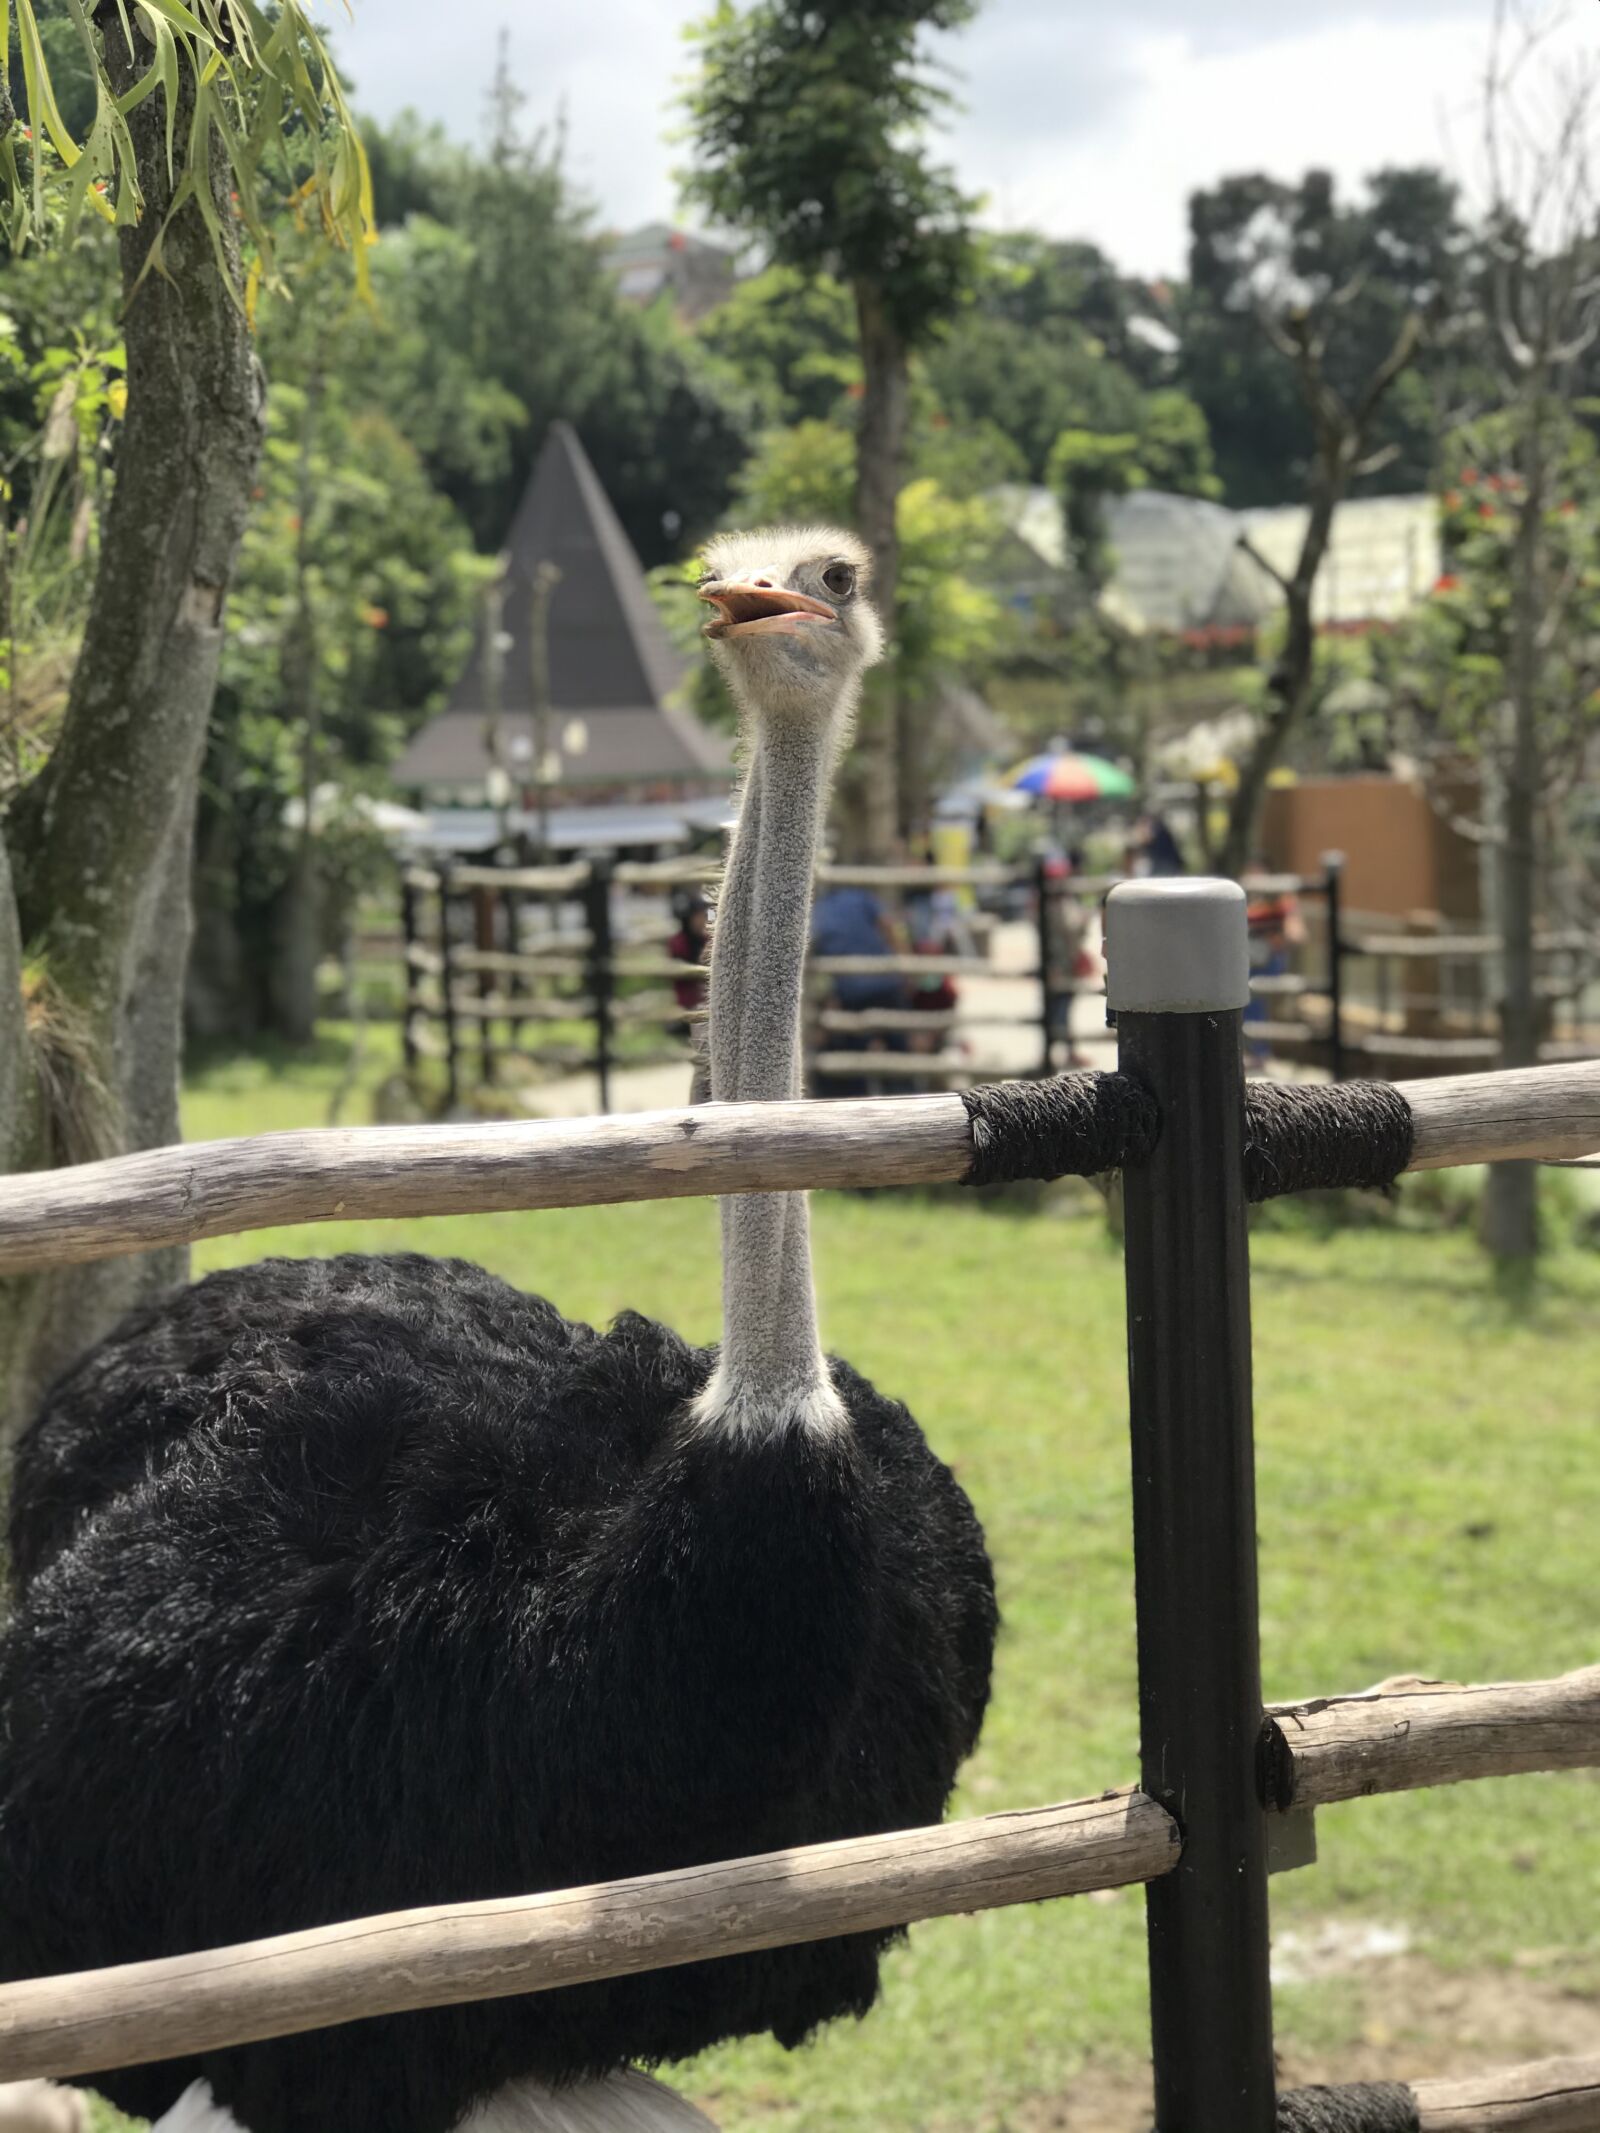 Apple iPhone 7 Plus + iPhone 7 Plus back dual camera 6.6mm f/2.8 sample photo. Ostrich, zoo, animal photography